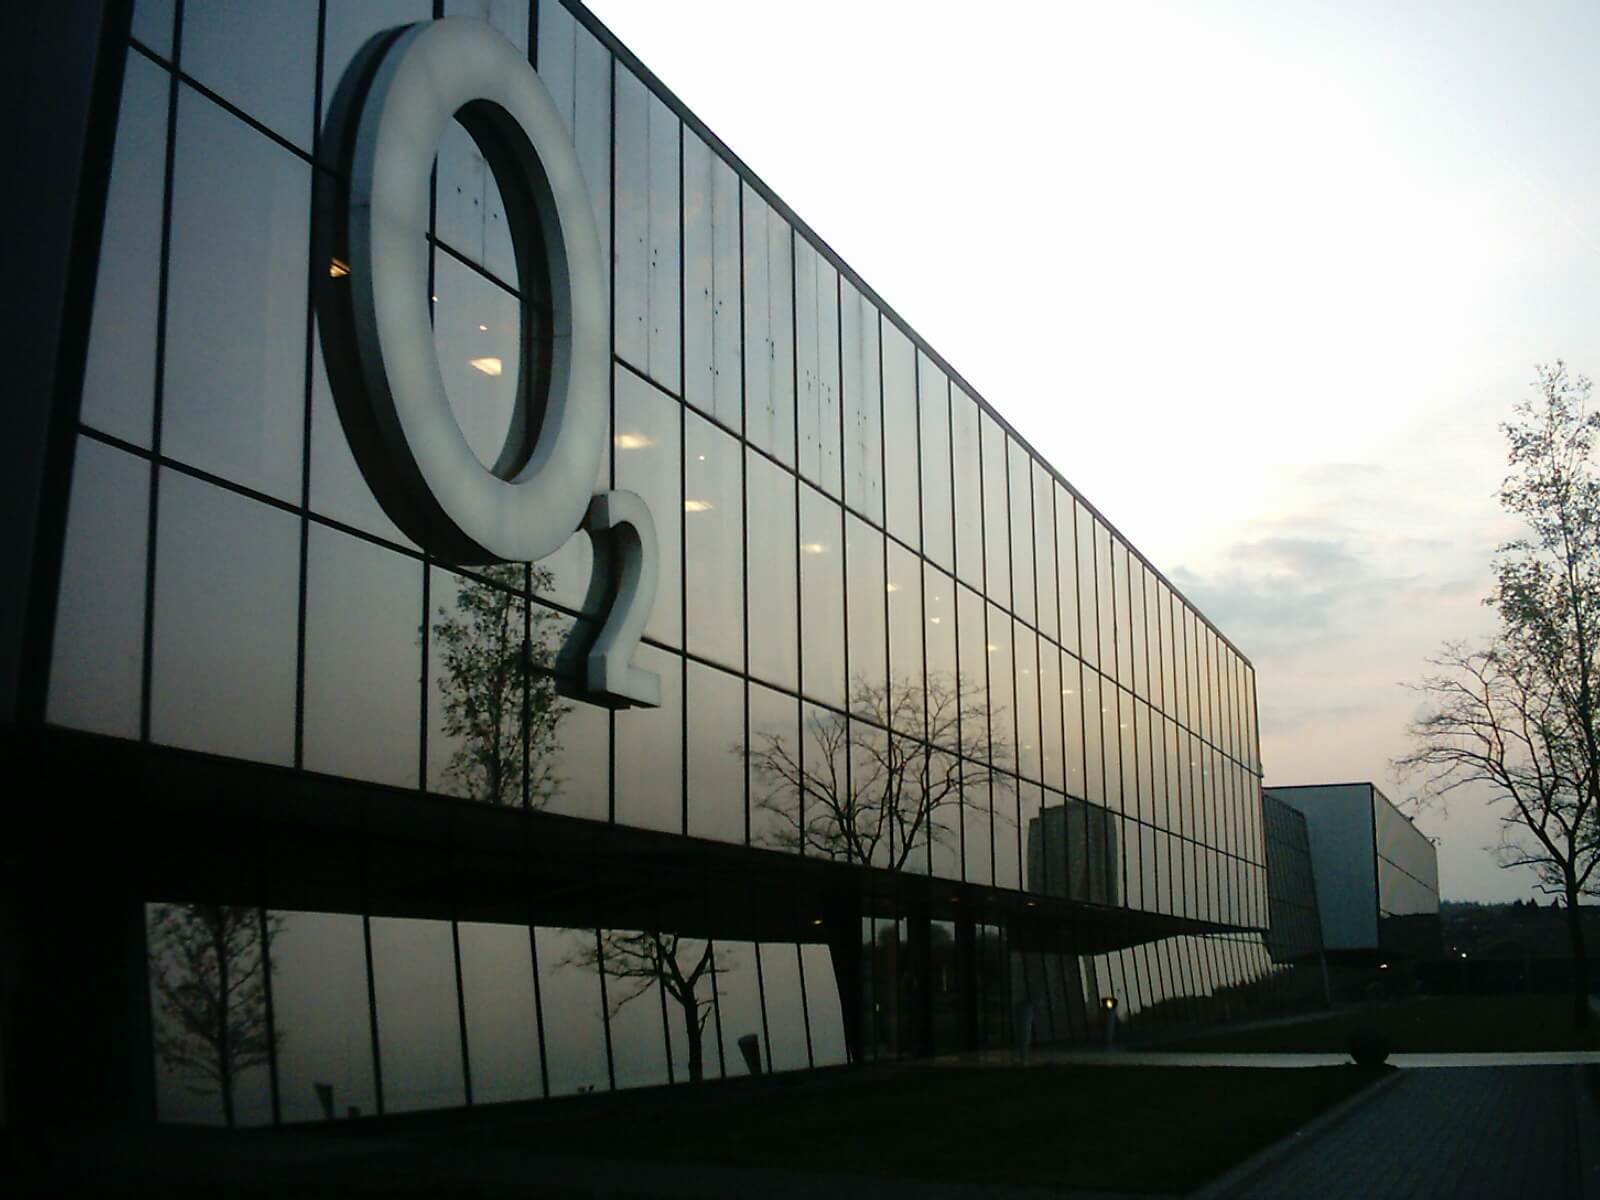 O2’s self-optimising network will learn from customers